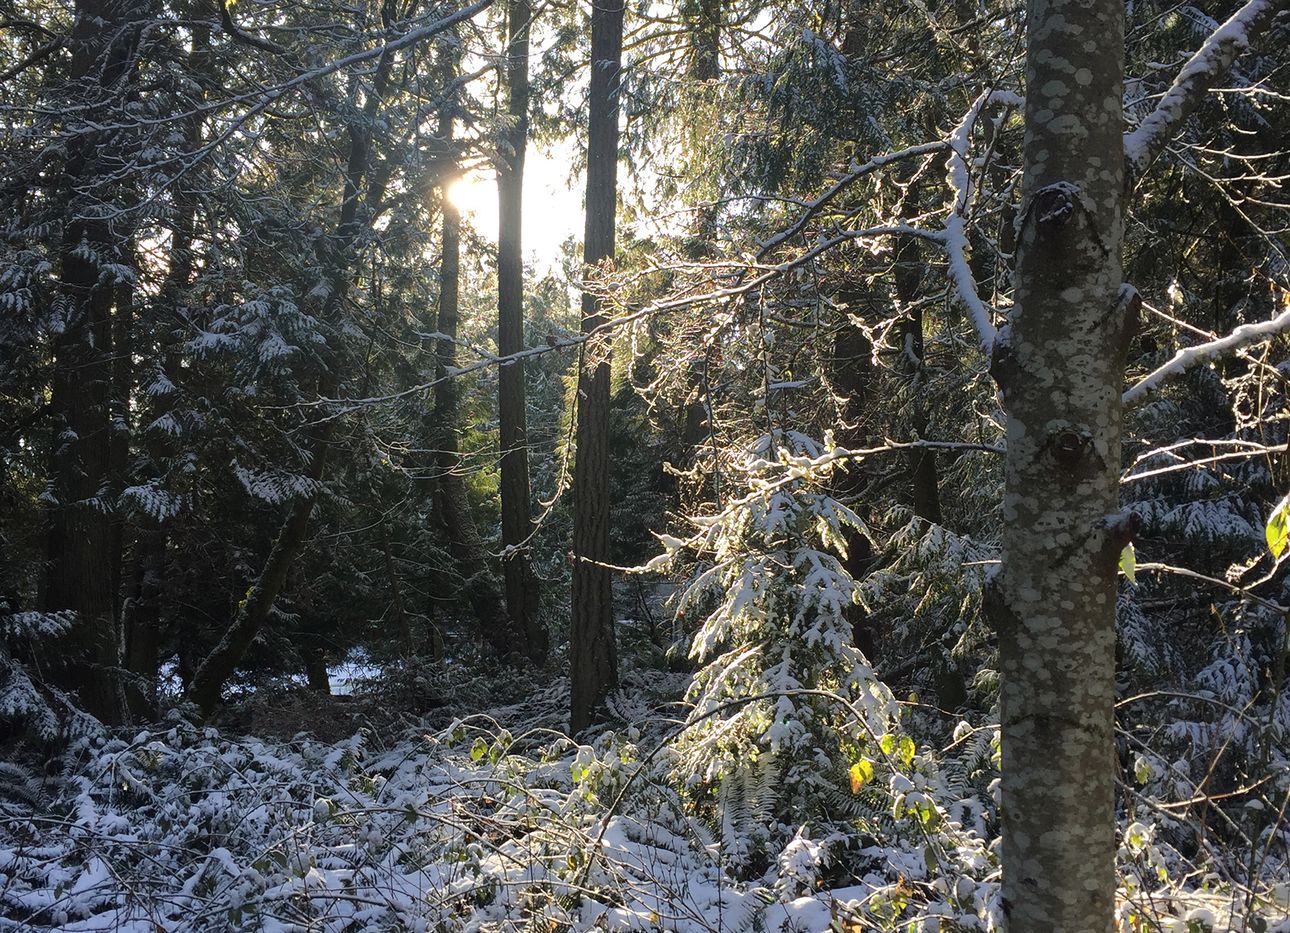 A forest in winter, with snow in evergreen branches and bushes.